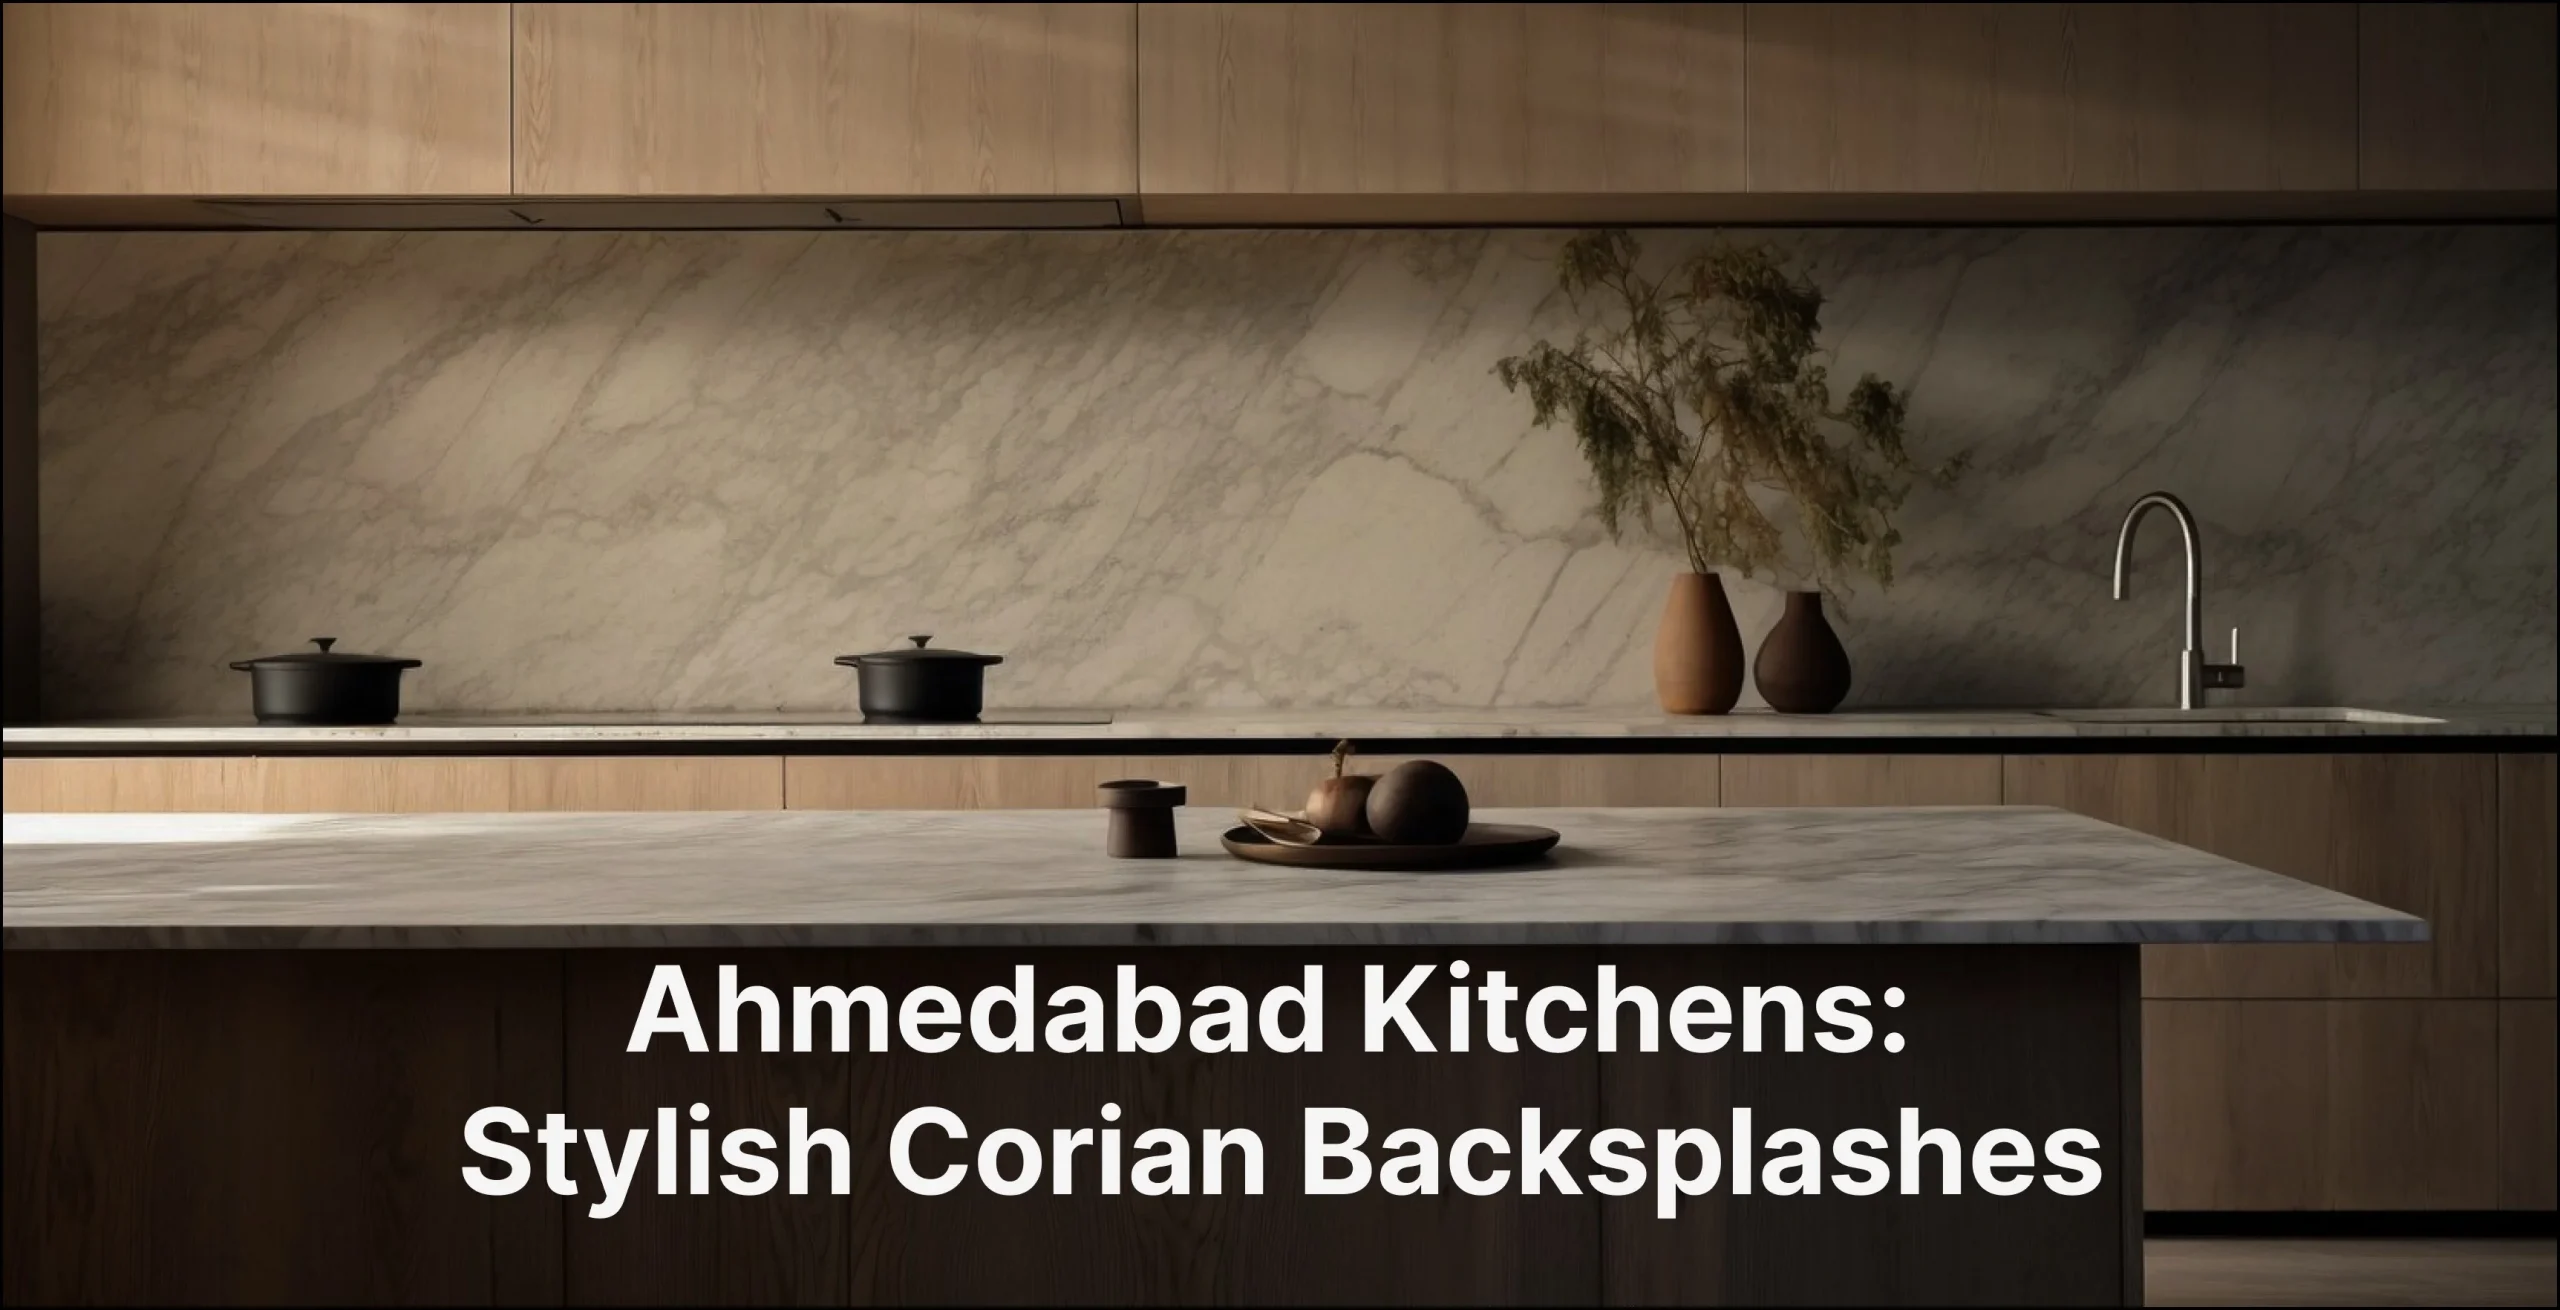 Corian Backsplashes: Functional and Stylish Solutions for Ahmedabad Kitchens